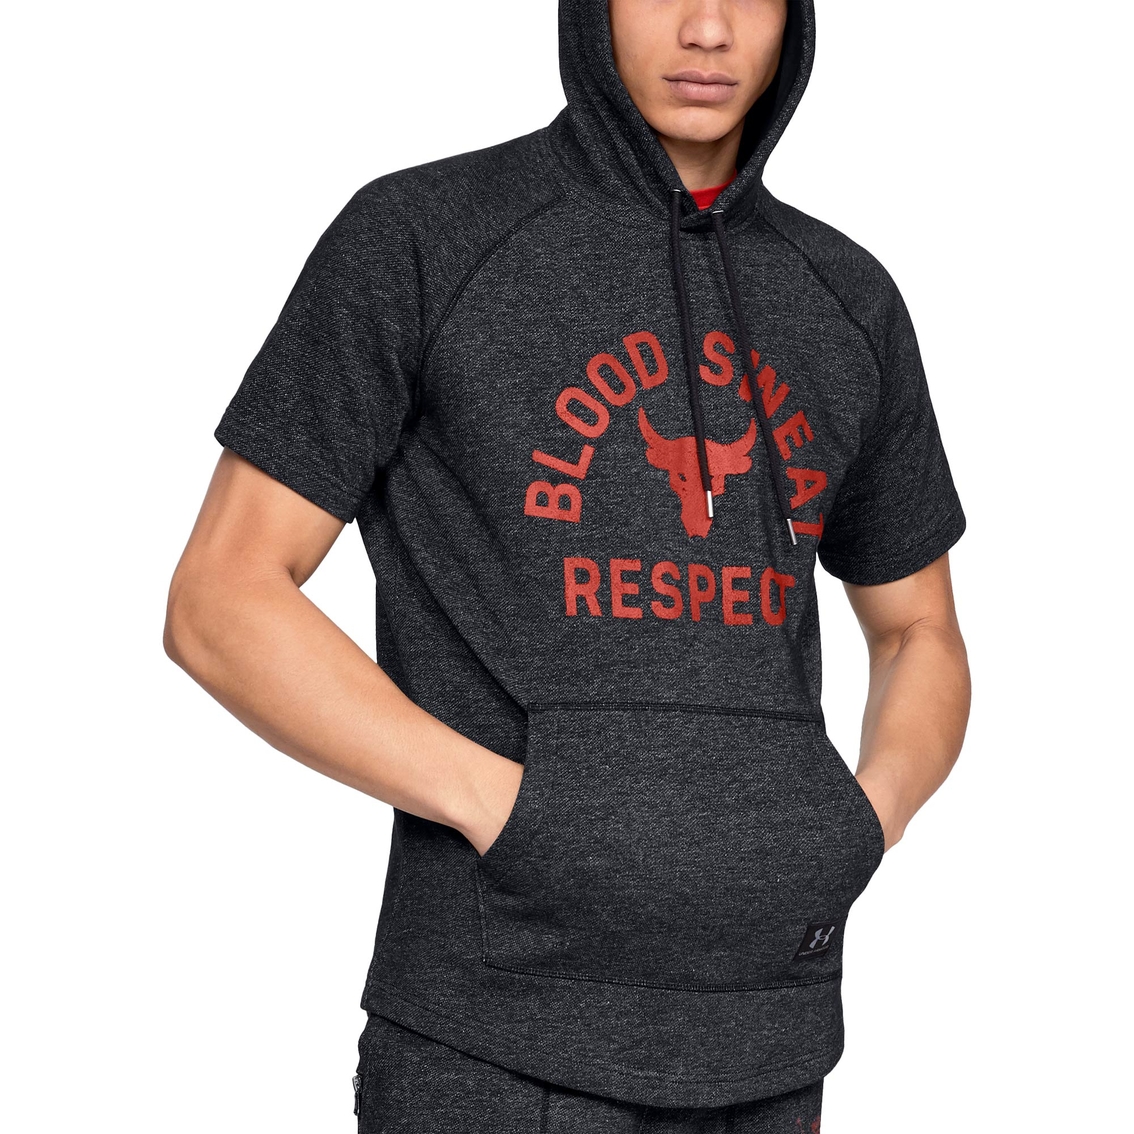 NEW Under Armour UA Project Rock Respect Fitness Hoodie Sz S M L XL $60 